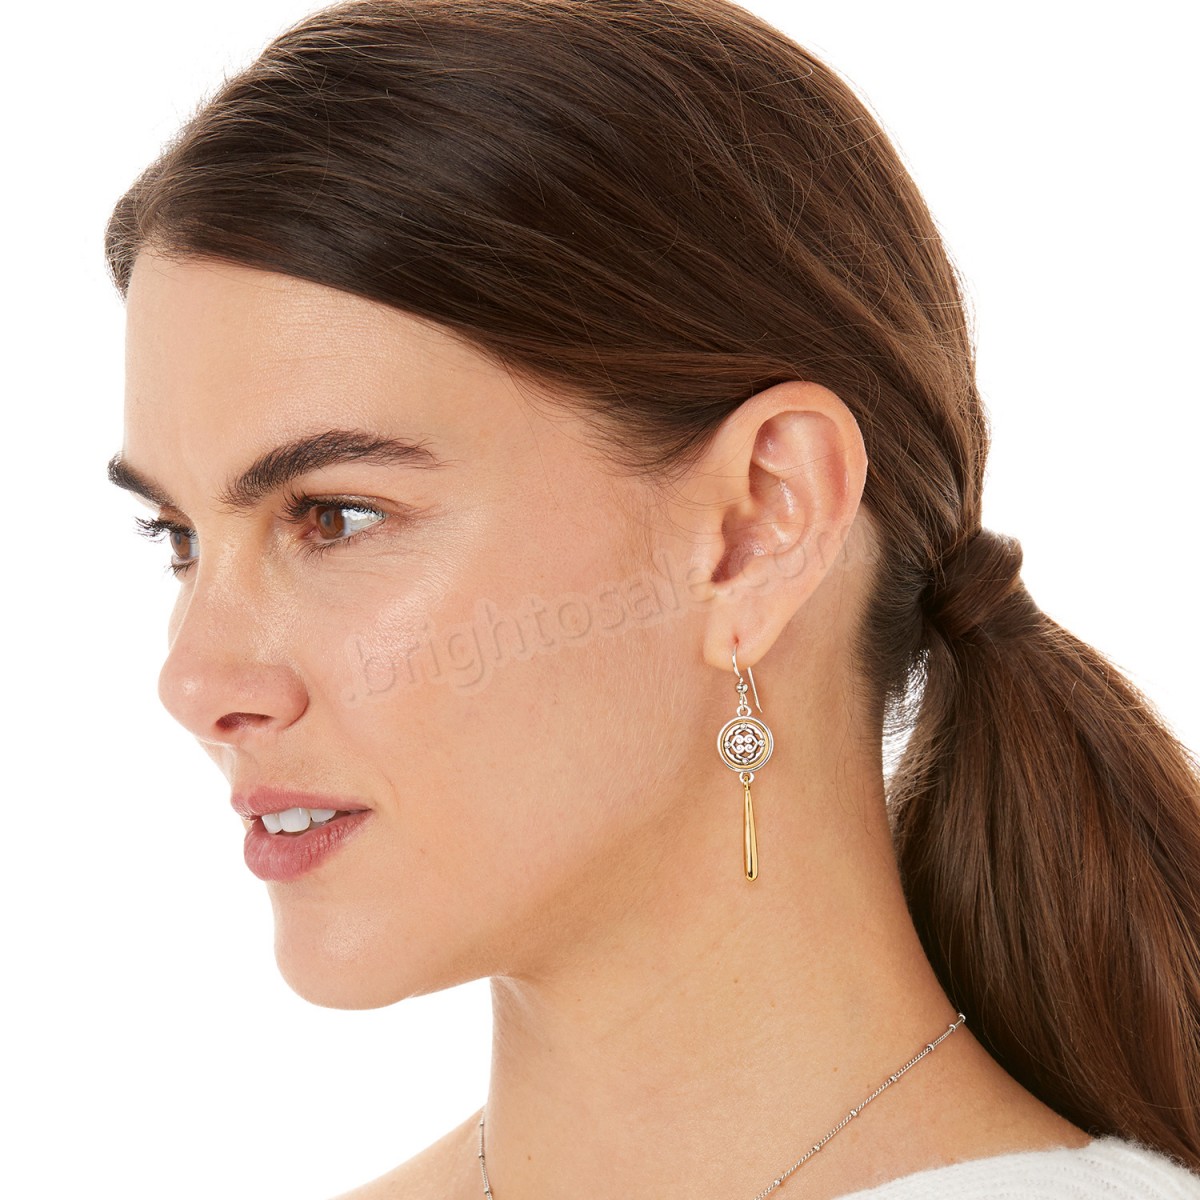 Brighton Collectibles & Online Discount Intrigue Teardrop French Wire Earrings - -2